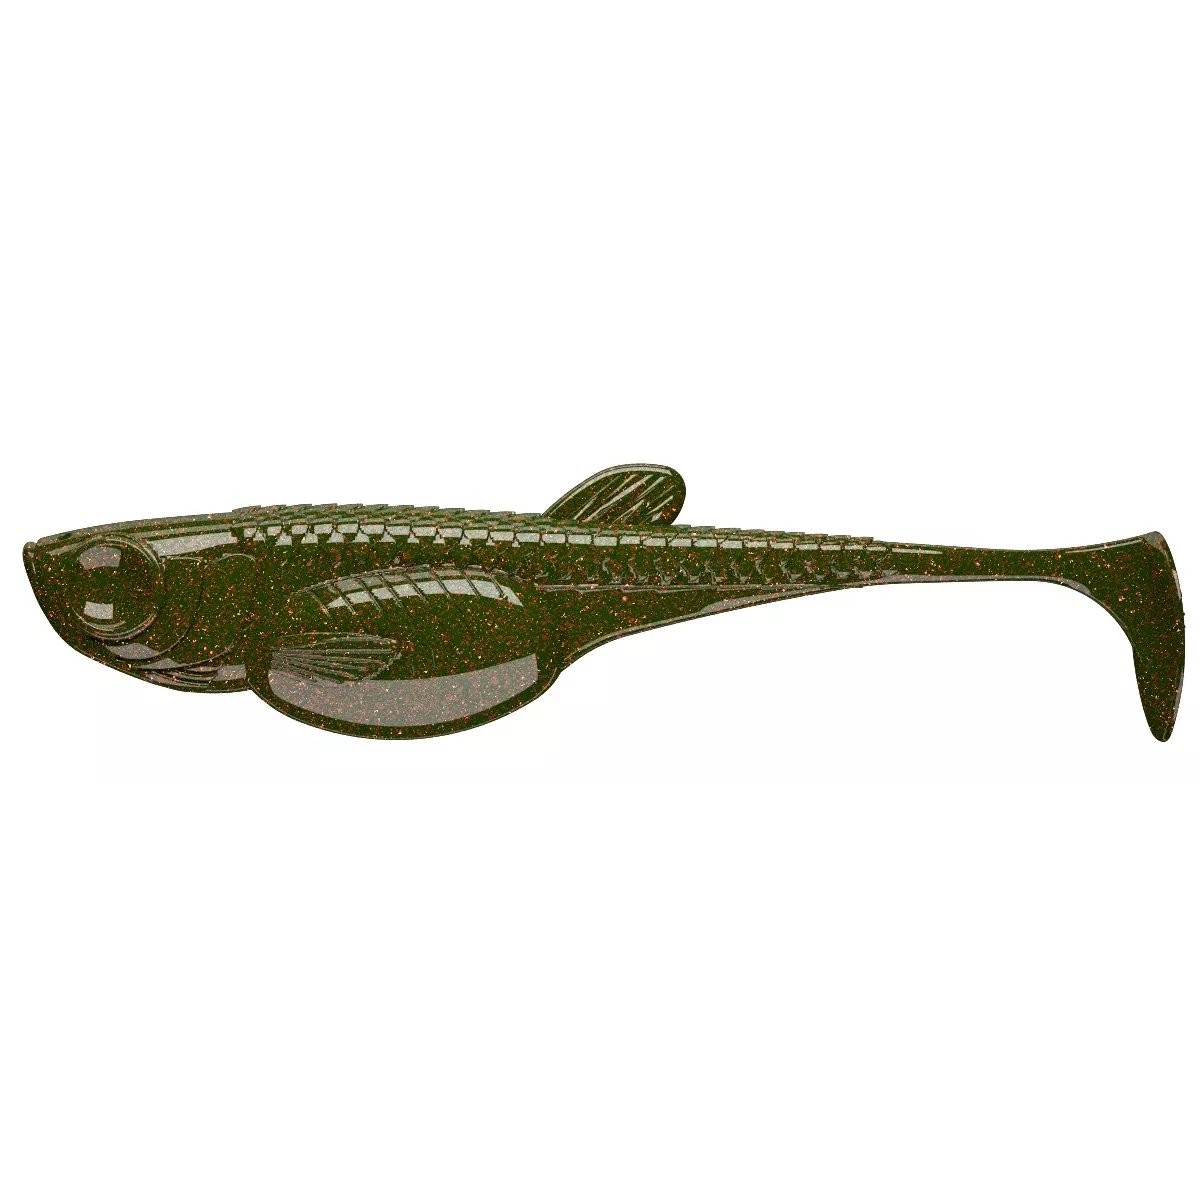 Libra Lures Embrion Shad 2'' 5cm - 032 / MOTOR OIL GREEN